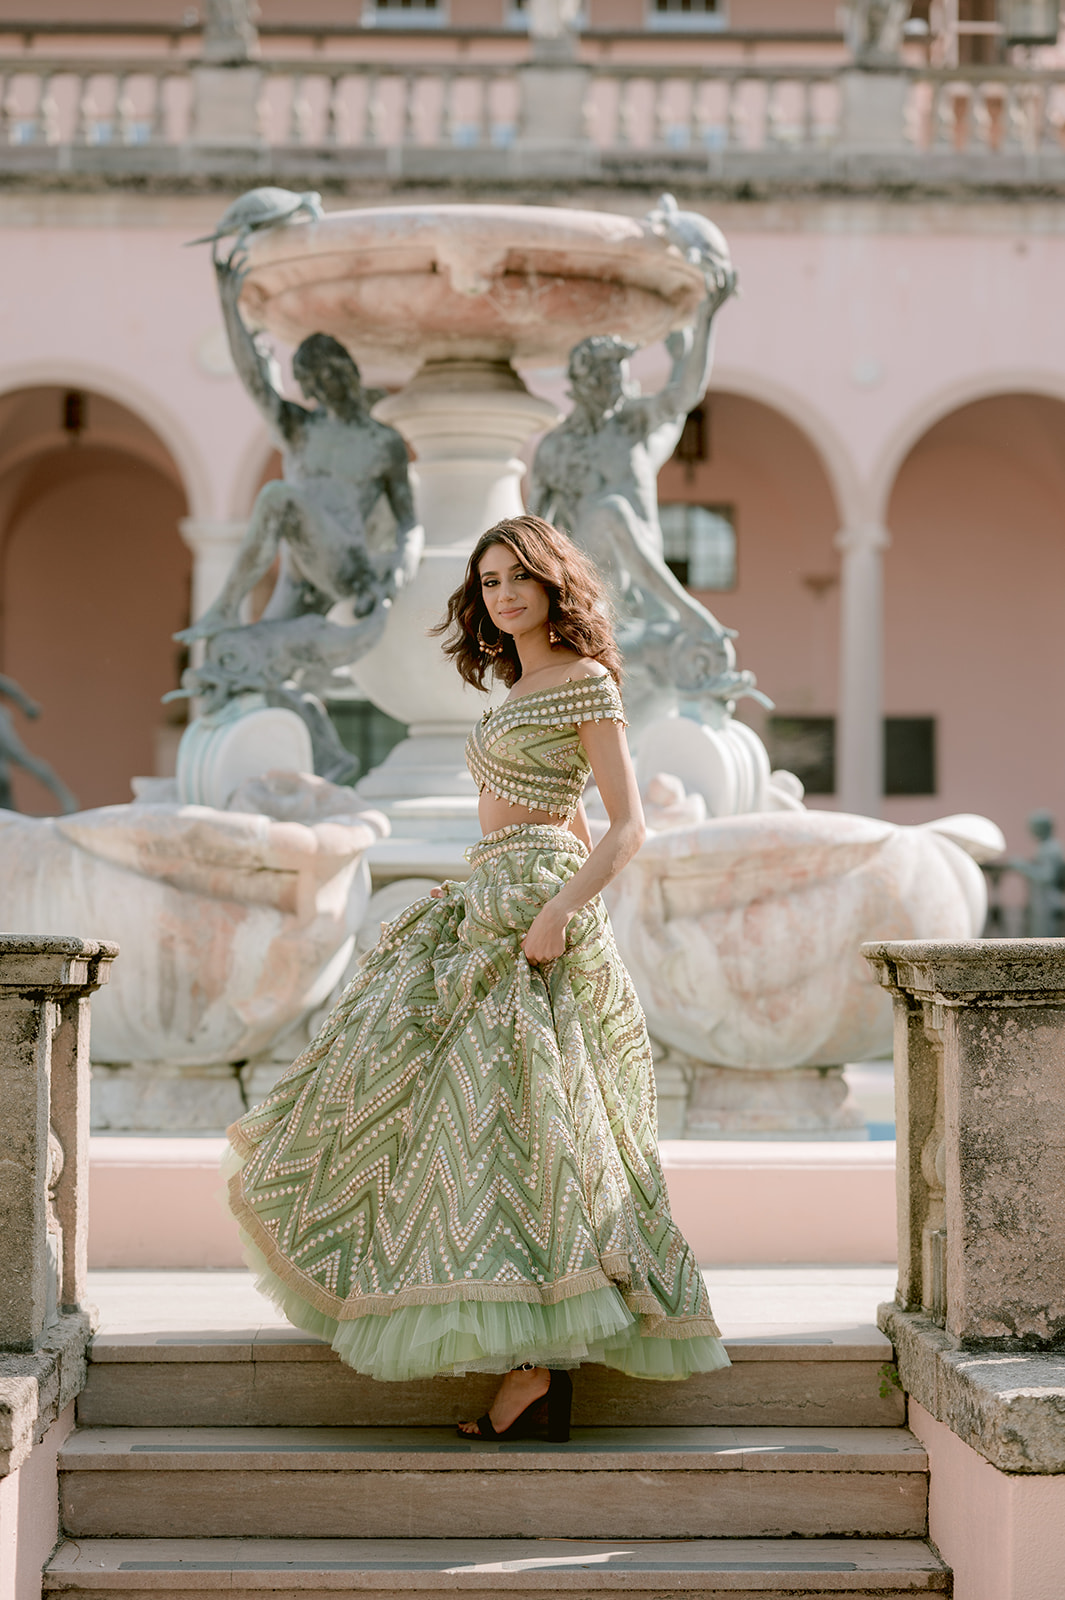 "Ringling Museum engagement shoot featuring the beautiful Ca' d'Zan mansion"
